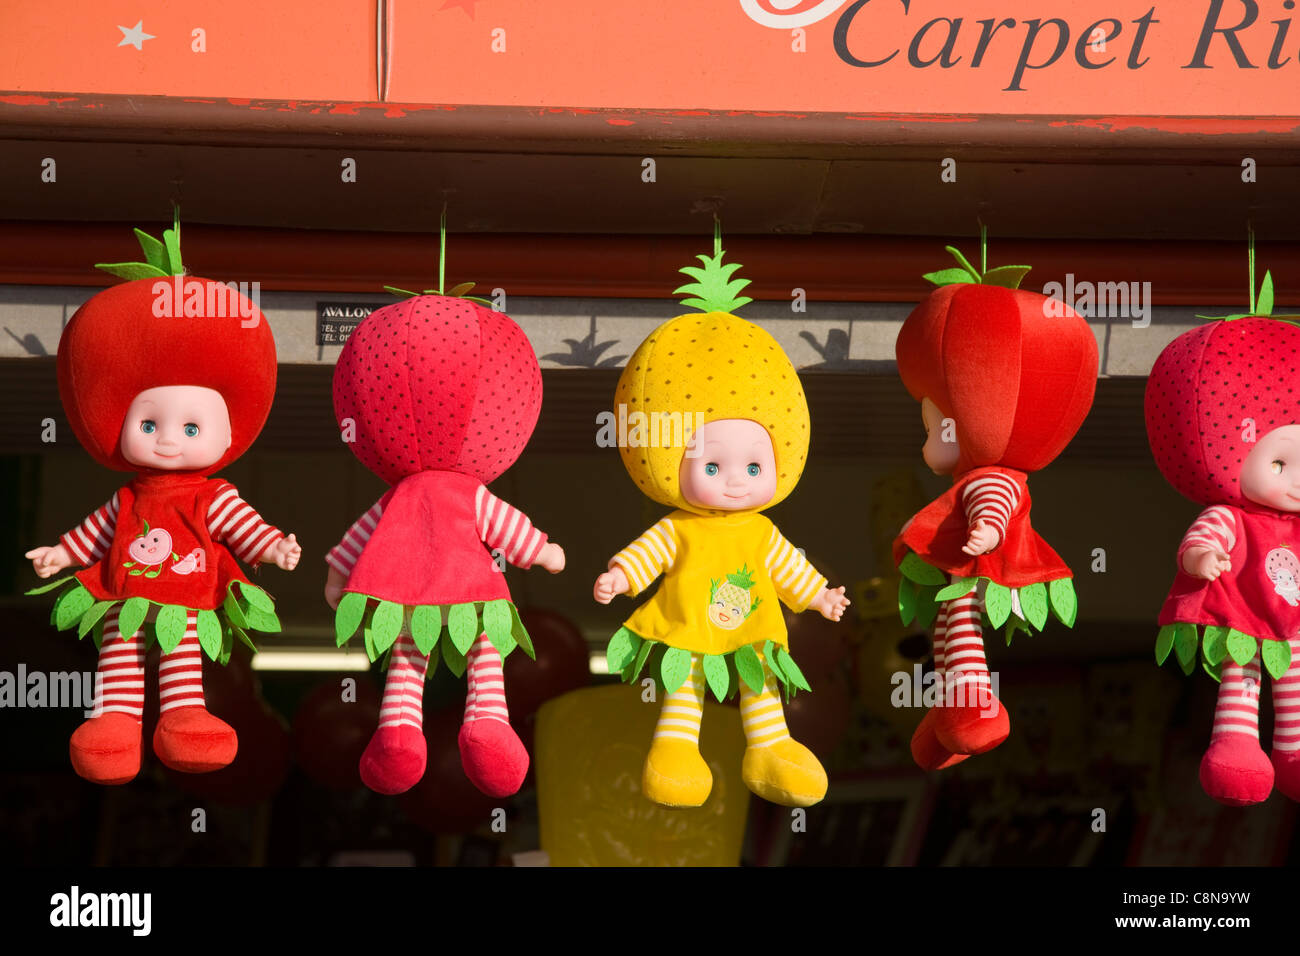 Fruit dolls, the next 'latest craze', according to the shopkeeper selling them from his stall in Blackpool, UK Stock Photo